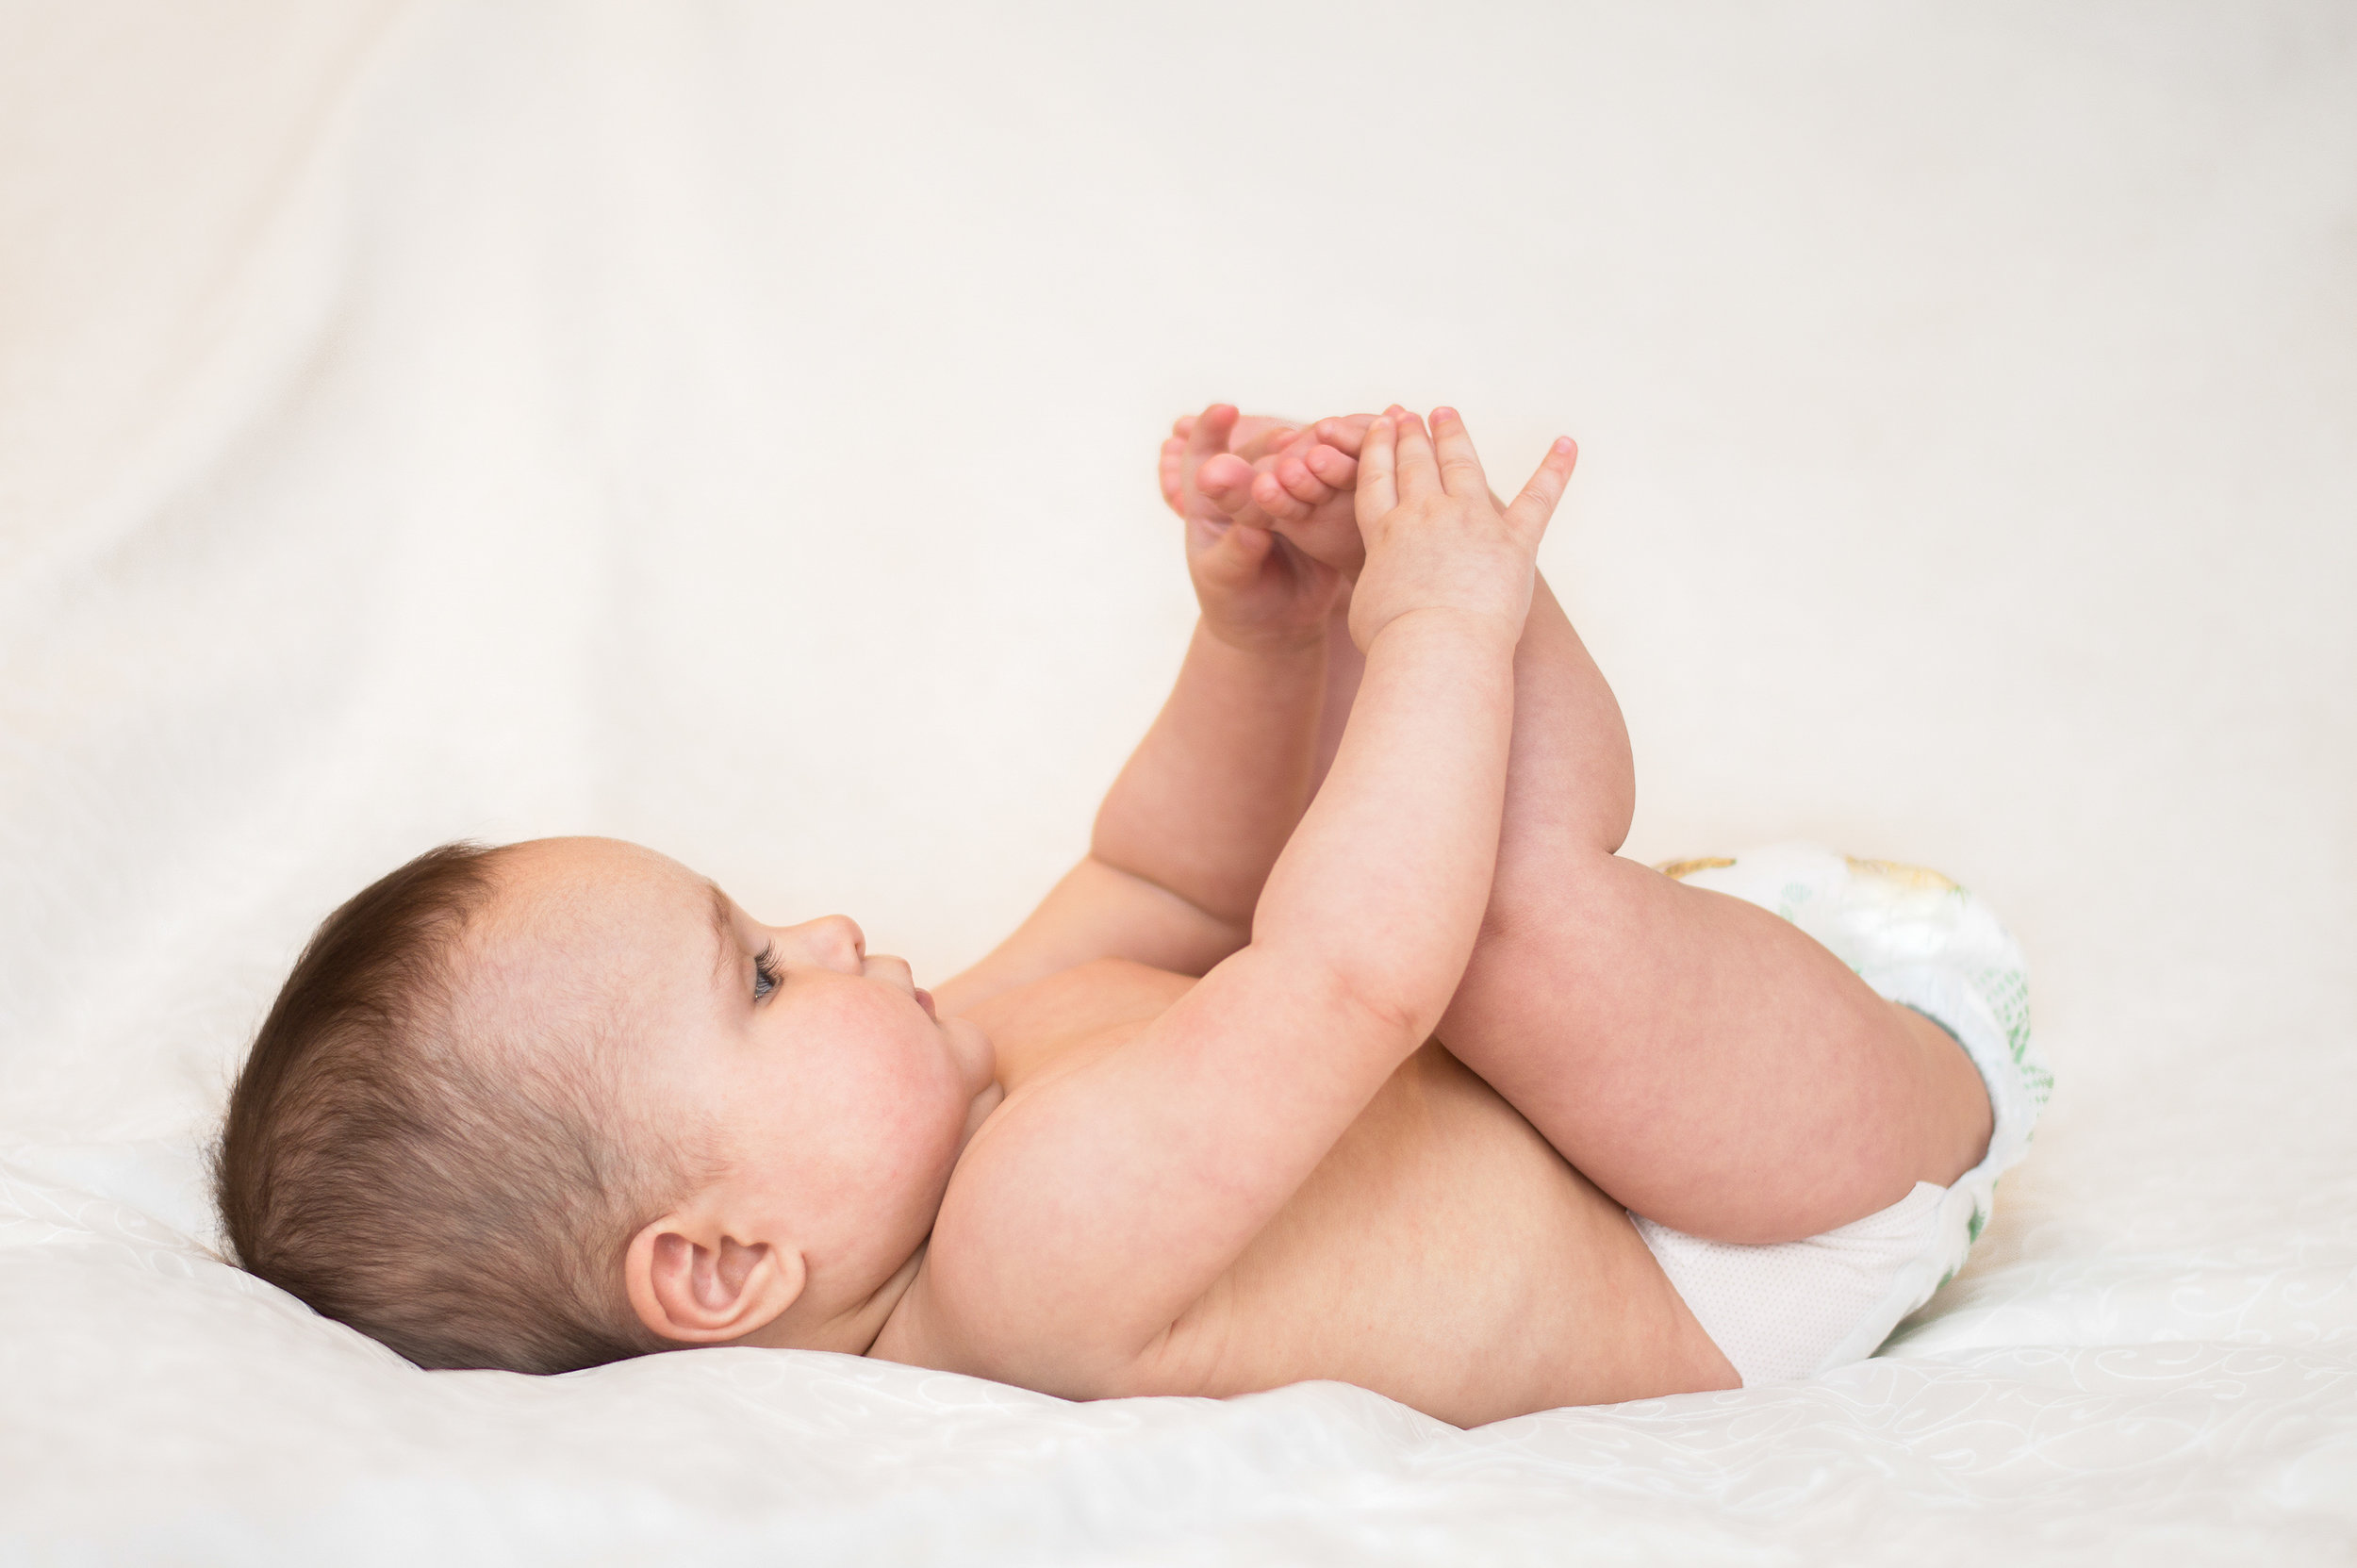 baby-is-playing-with-her-feet-481562070_3000x1995.jpeg